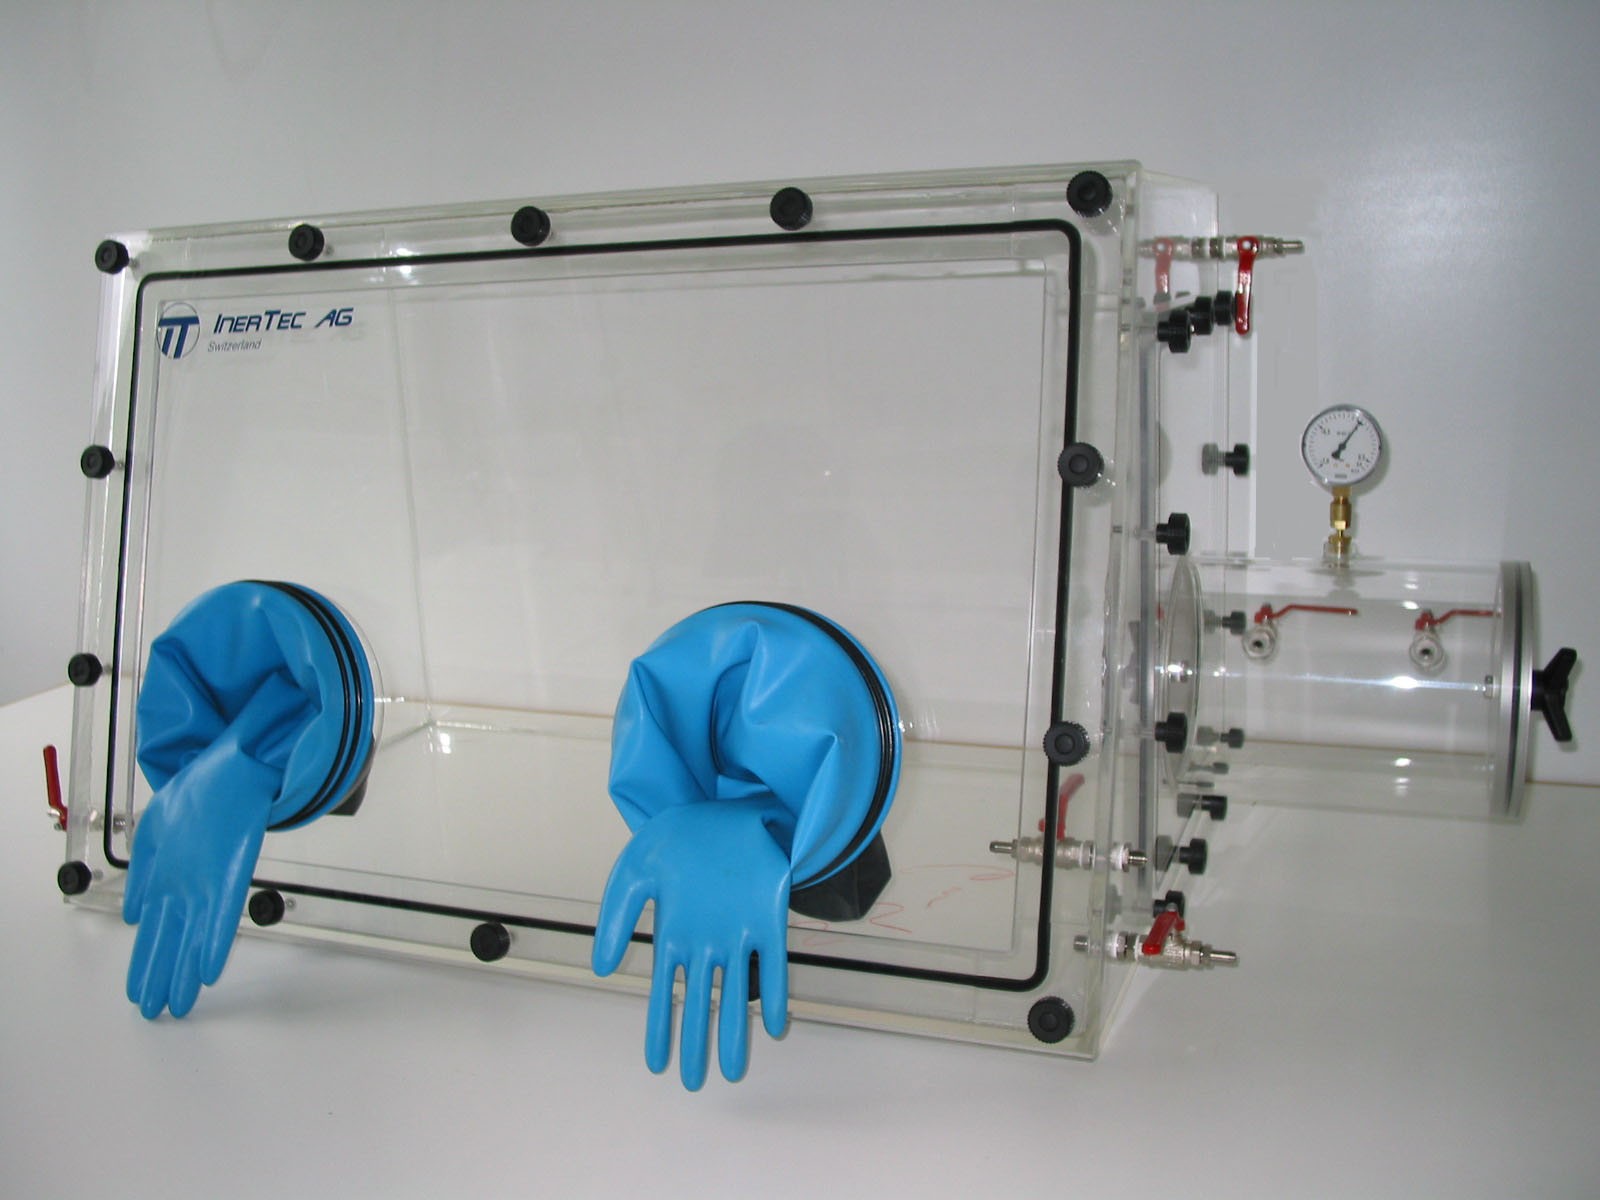 Glovebox made of acrylic&gt; Gas filling: automatic flushing with pressure control, front version: standard, side version: rectangular lock control: oxygen regulator with data logger